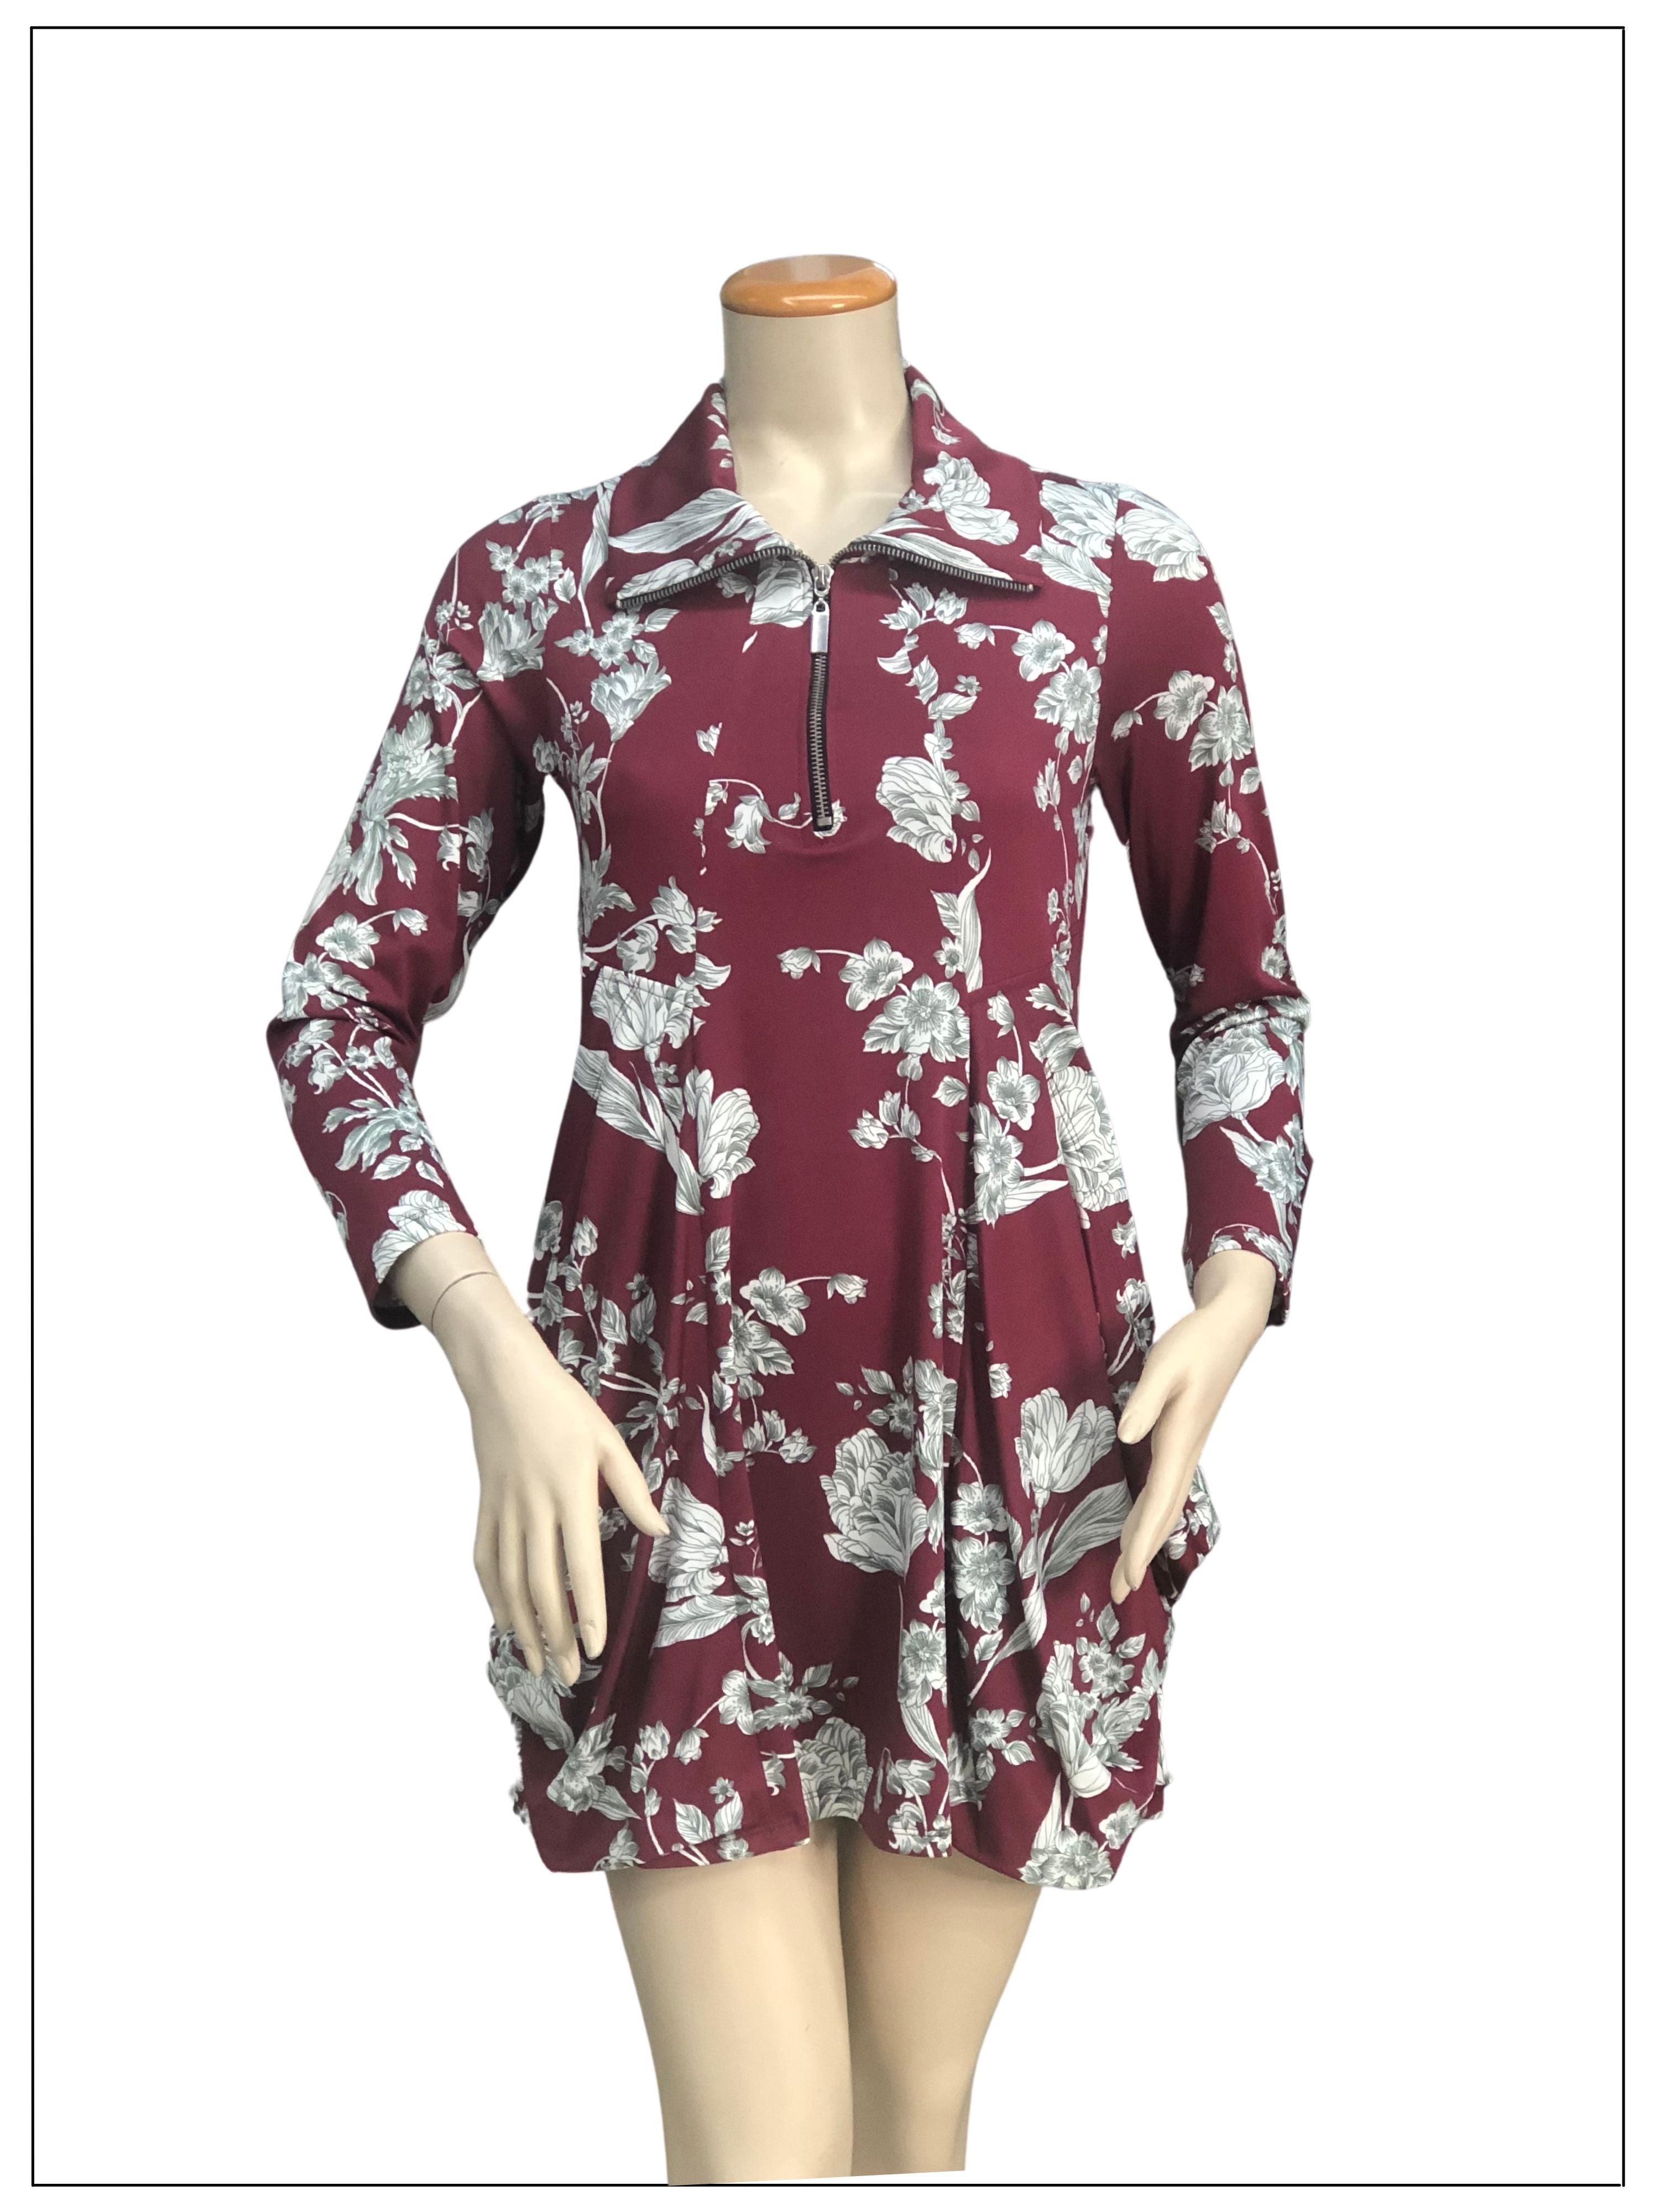 FASHQUE - Tunic Long Sleeves Kangaroo Pocket Zipper Front Tunic in PRINTS - T627 SALE